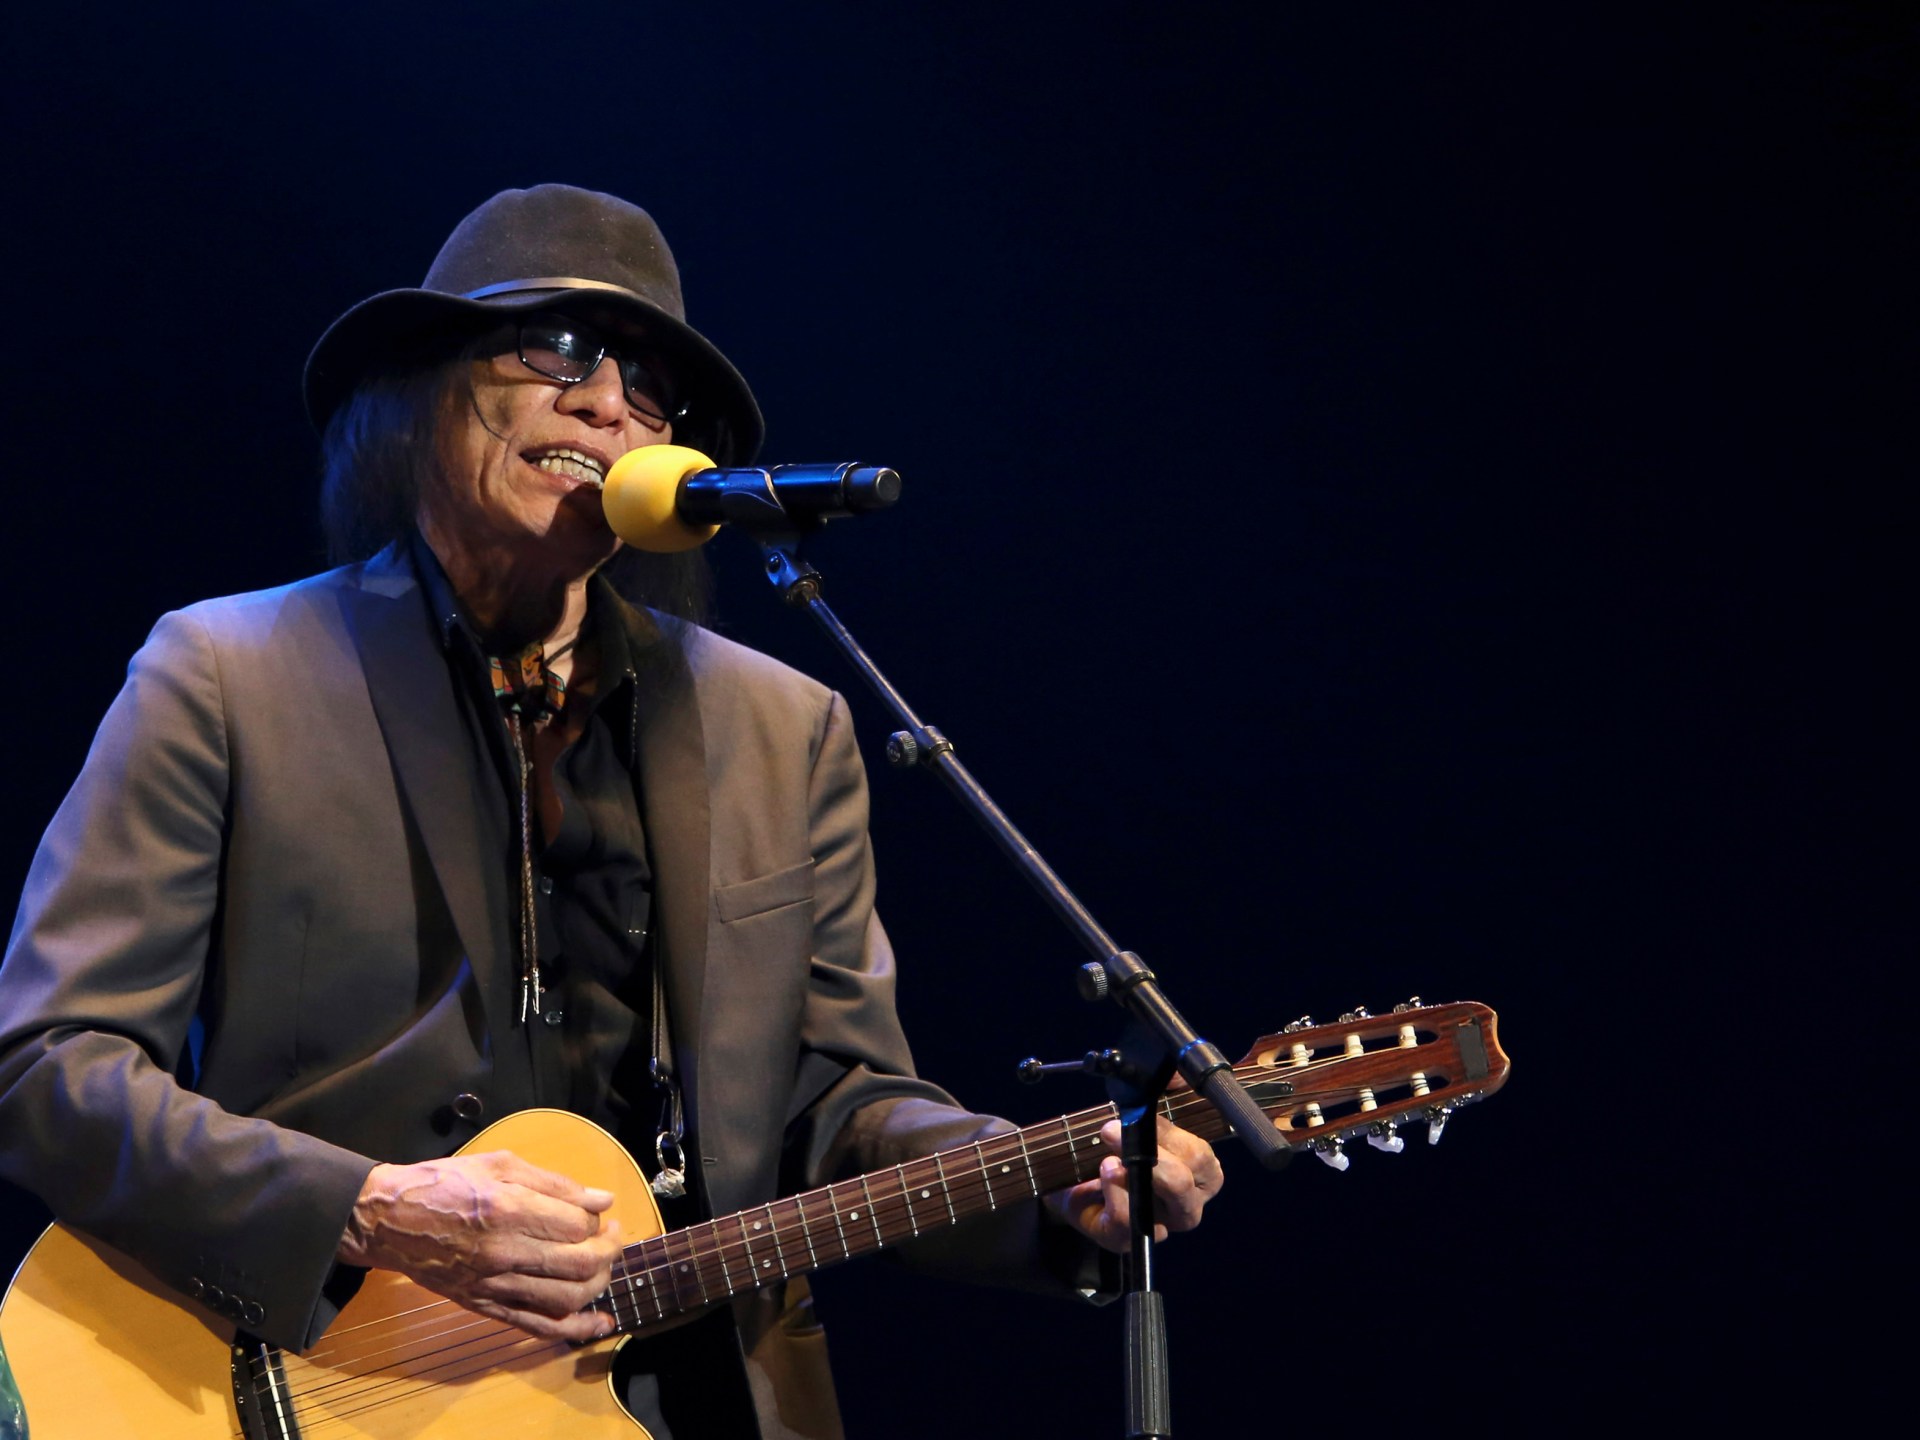 Singer and songwriter Sixto Rodriguez dies at 81